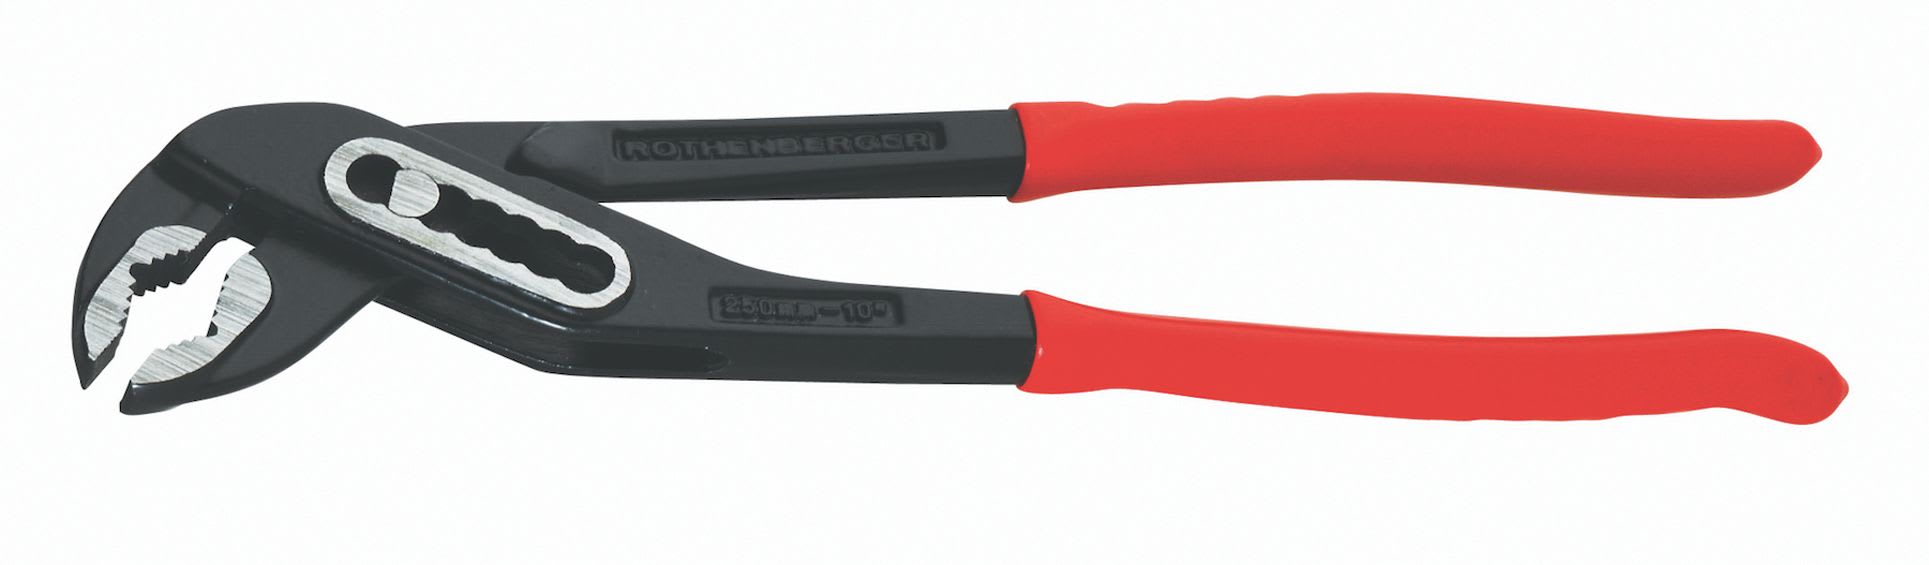 Rothenberger Water Pump Pliers - 12in